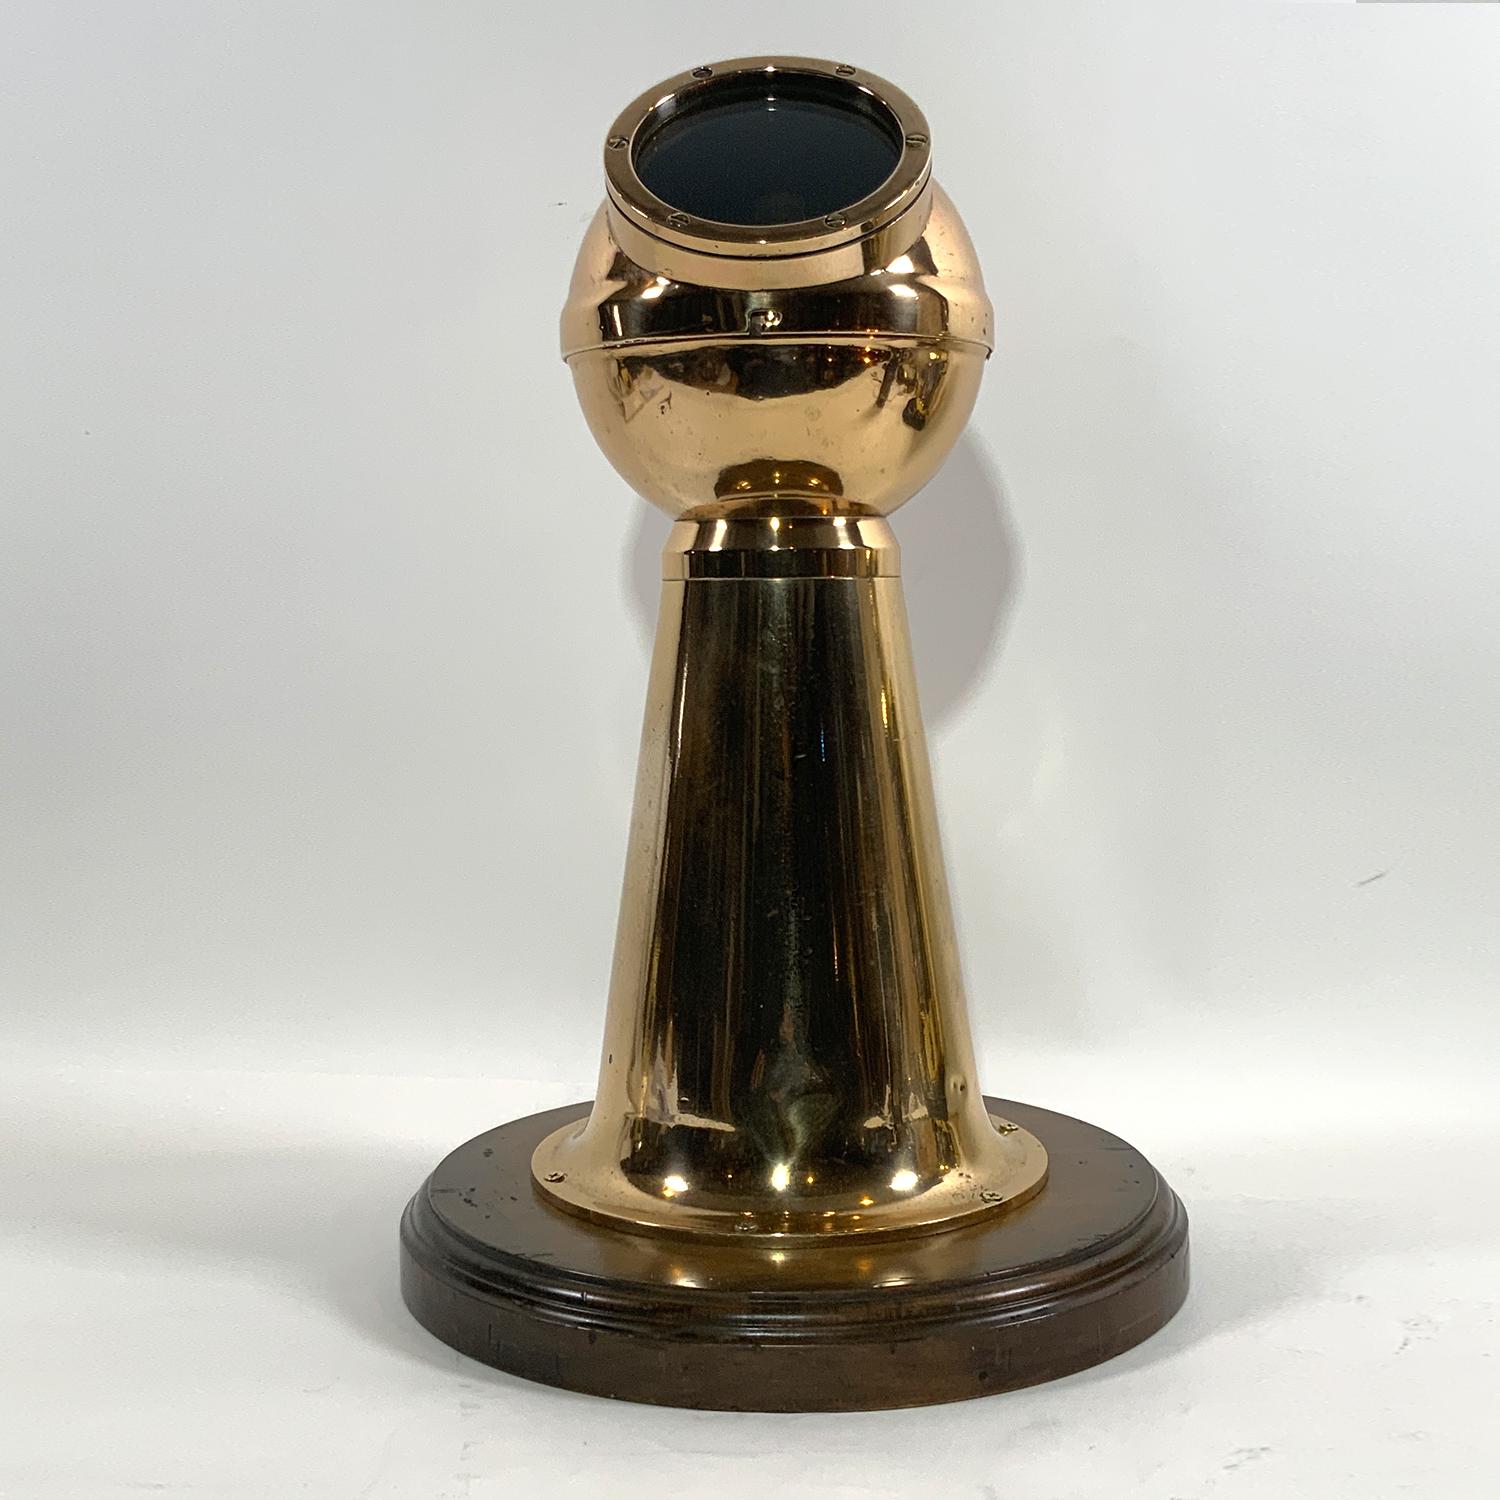 Kevin White Boston Yacht binnacle with a highly polished and lacquered pillar shape binnacle. Art deco style. Removable hood with porthole window. Fitted to a thick wood base. Circa 1930.